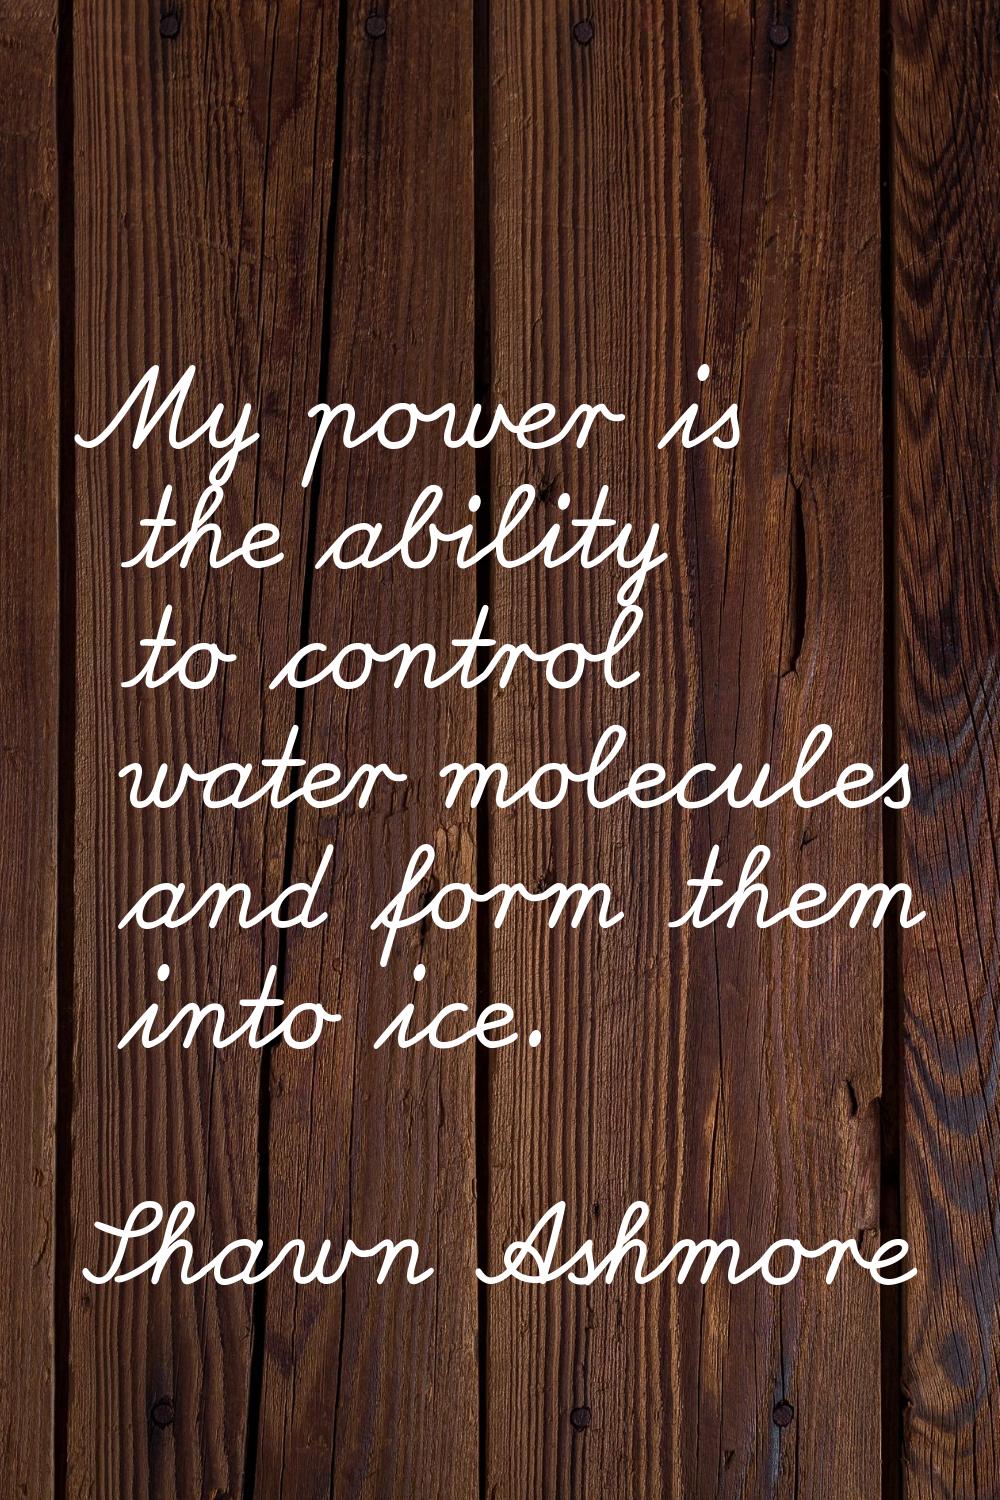 My power is the ability to control water molecules and form them into ice.